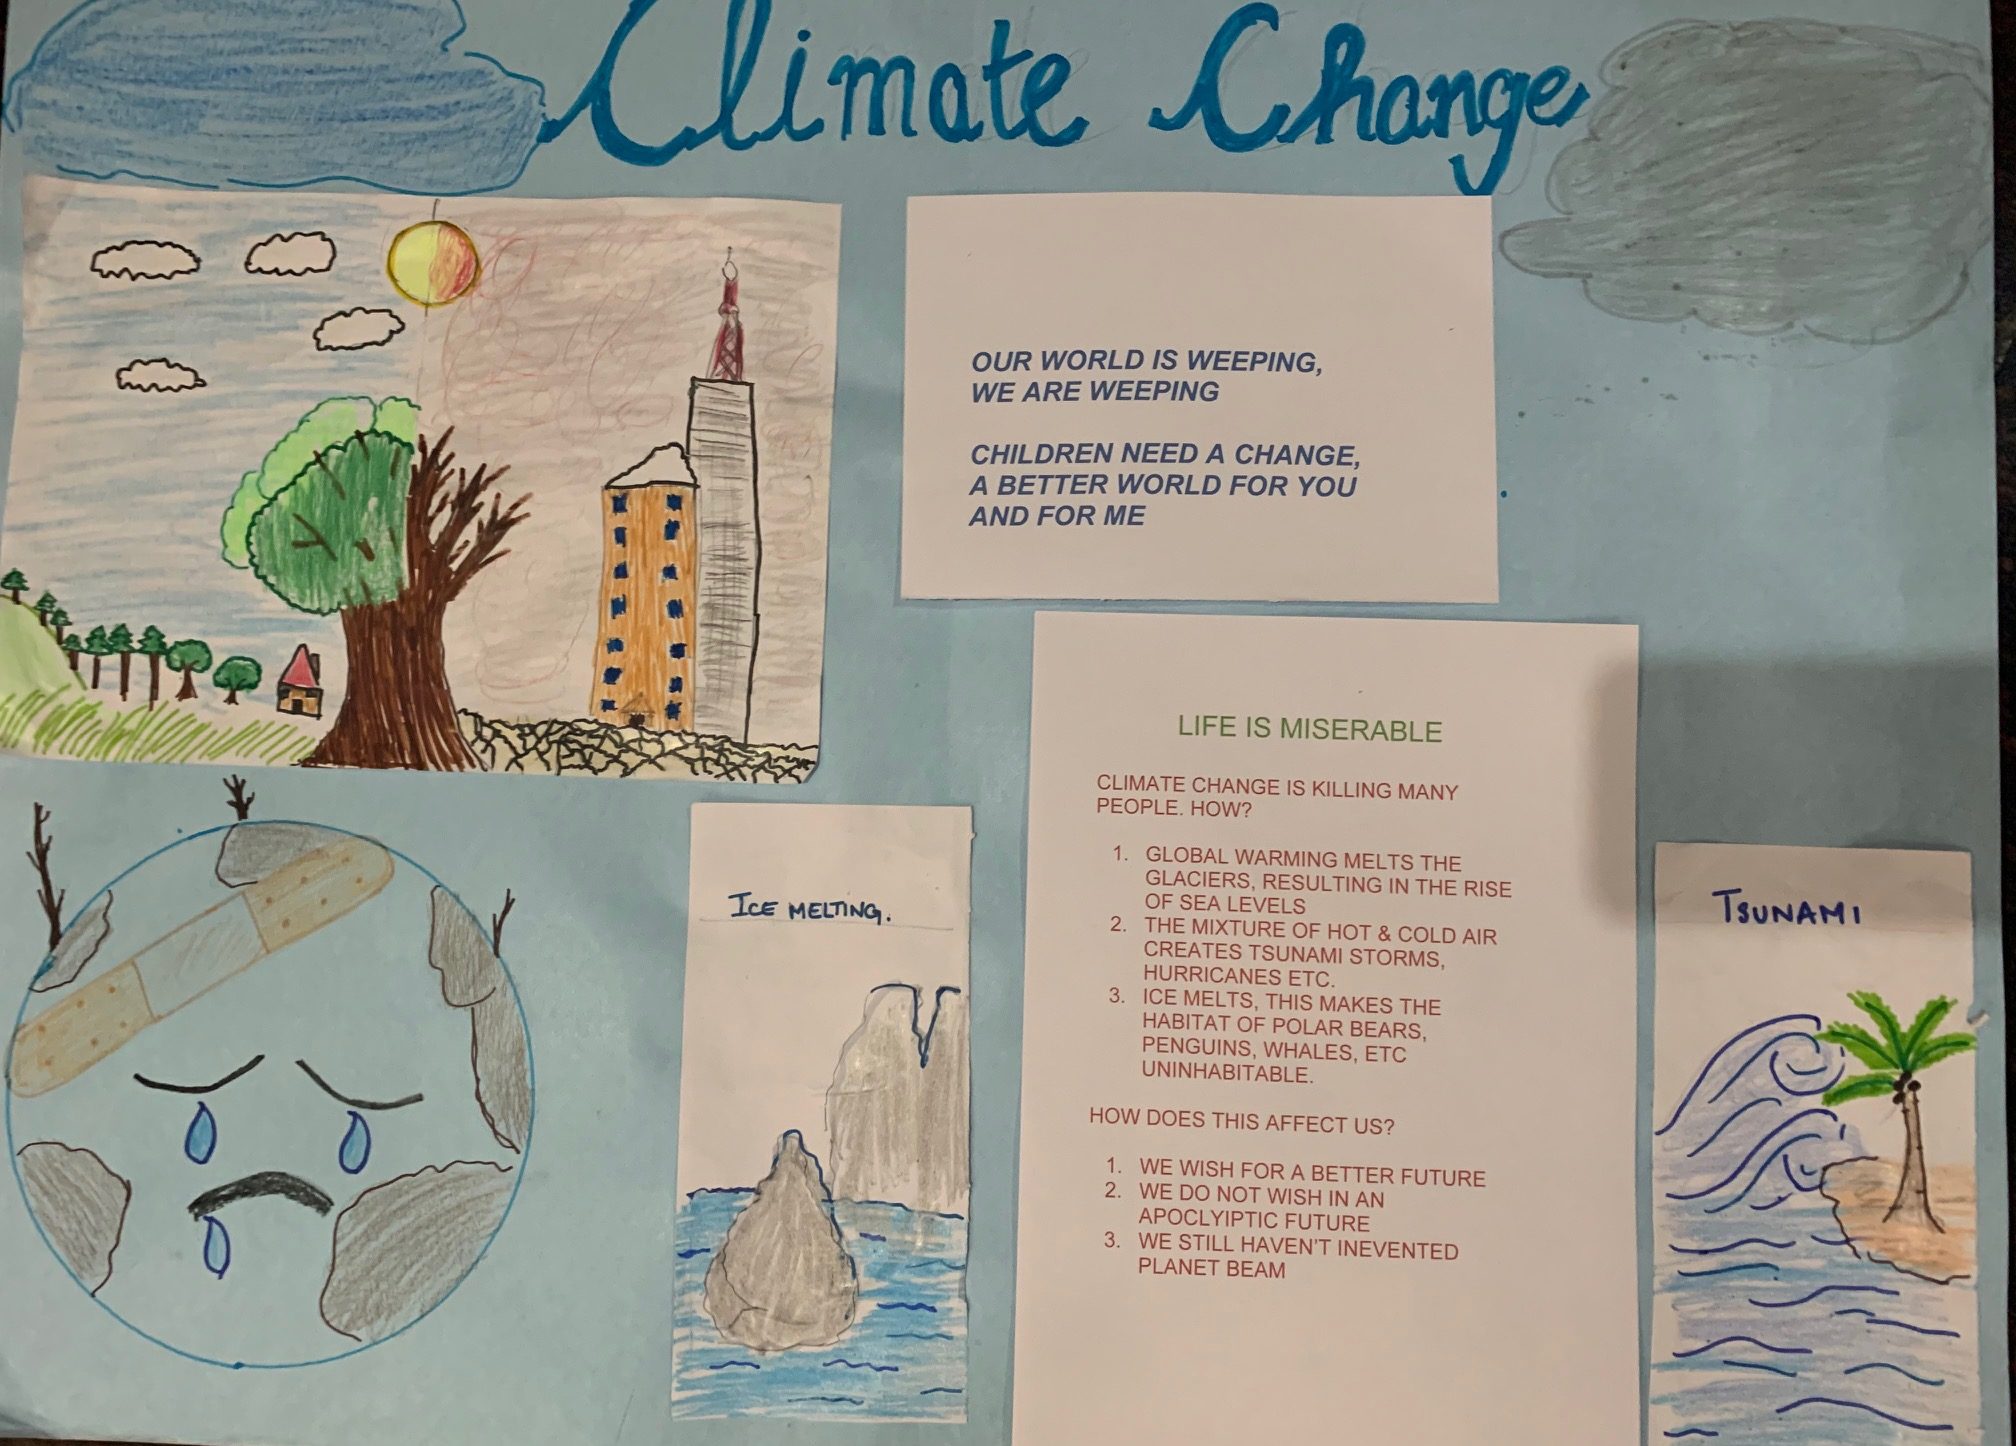 climate change and its effect poster drawing - YouTube